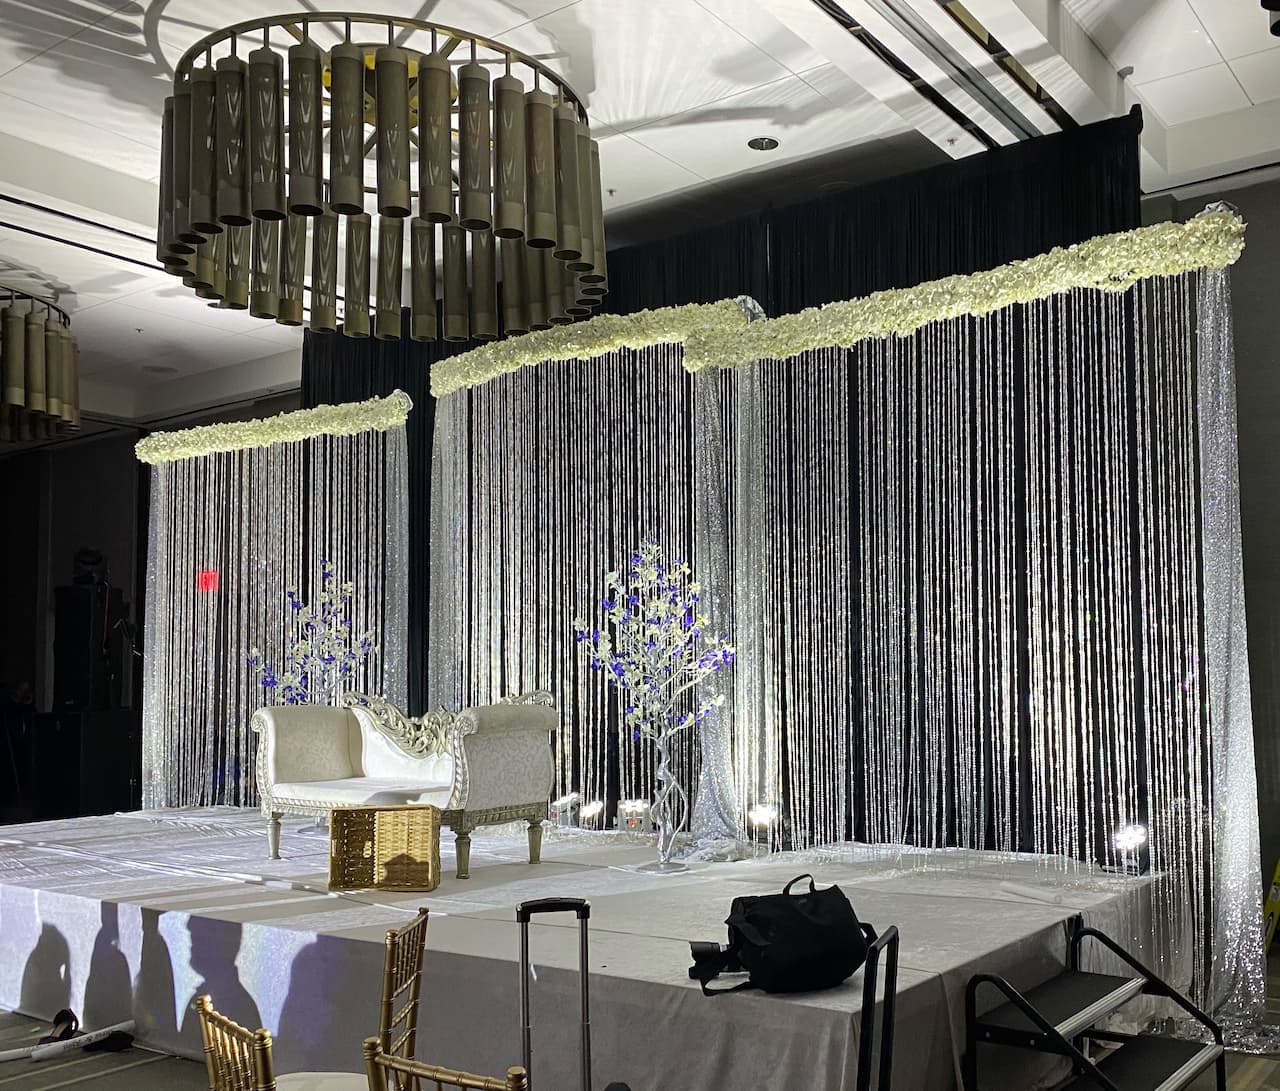 CUSTOM MADE GLASS CRYSTAL HANGING BEADED CURTAINS, CHANDELIERS AND COLUMNS  